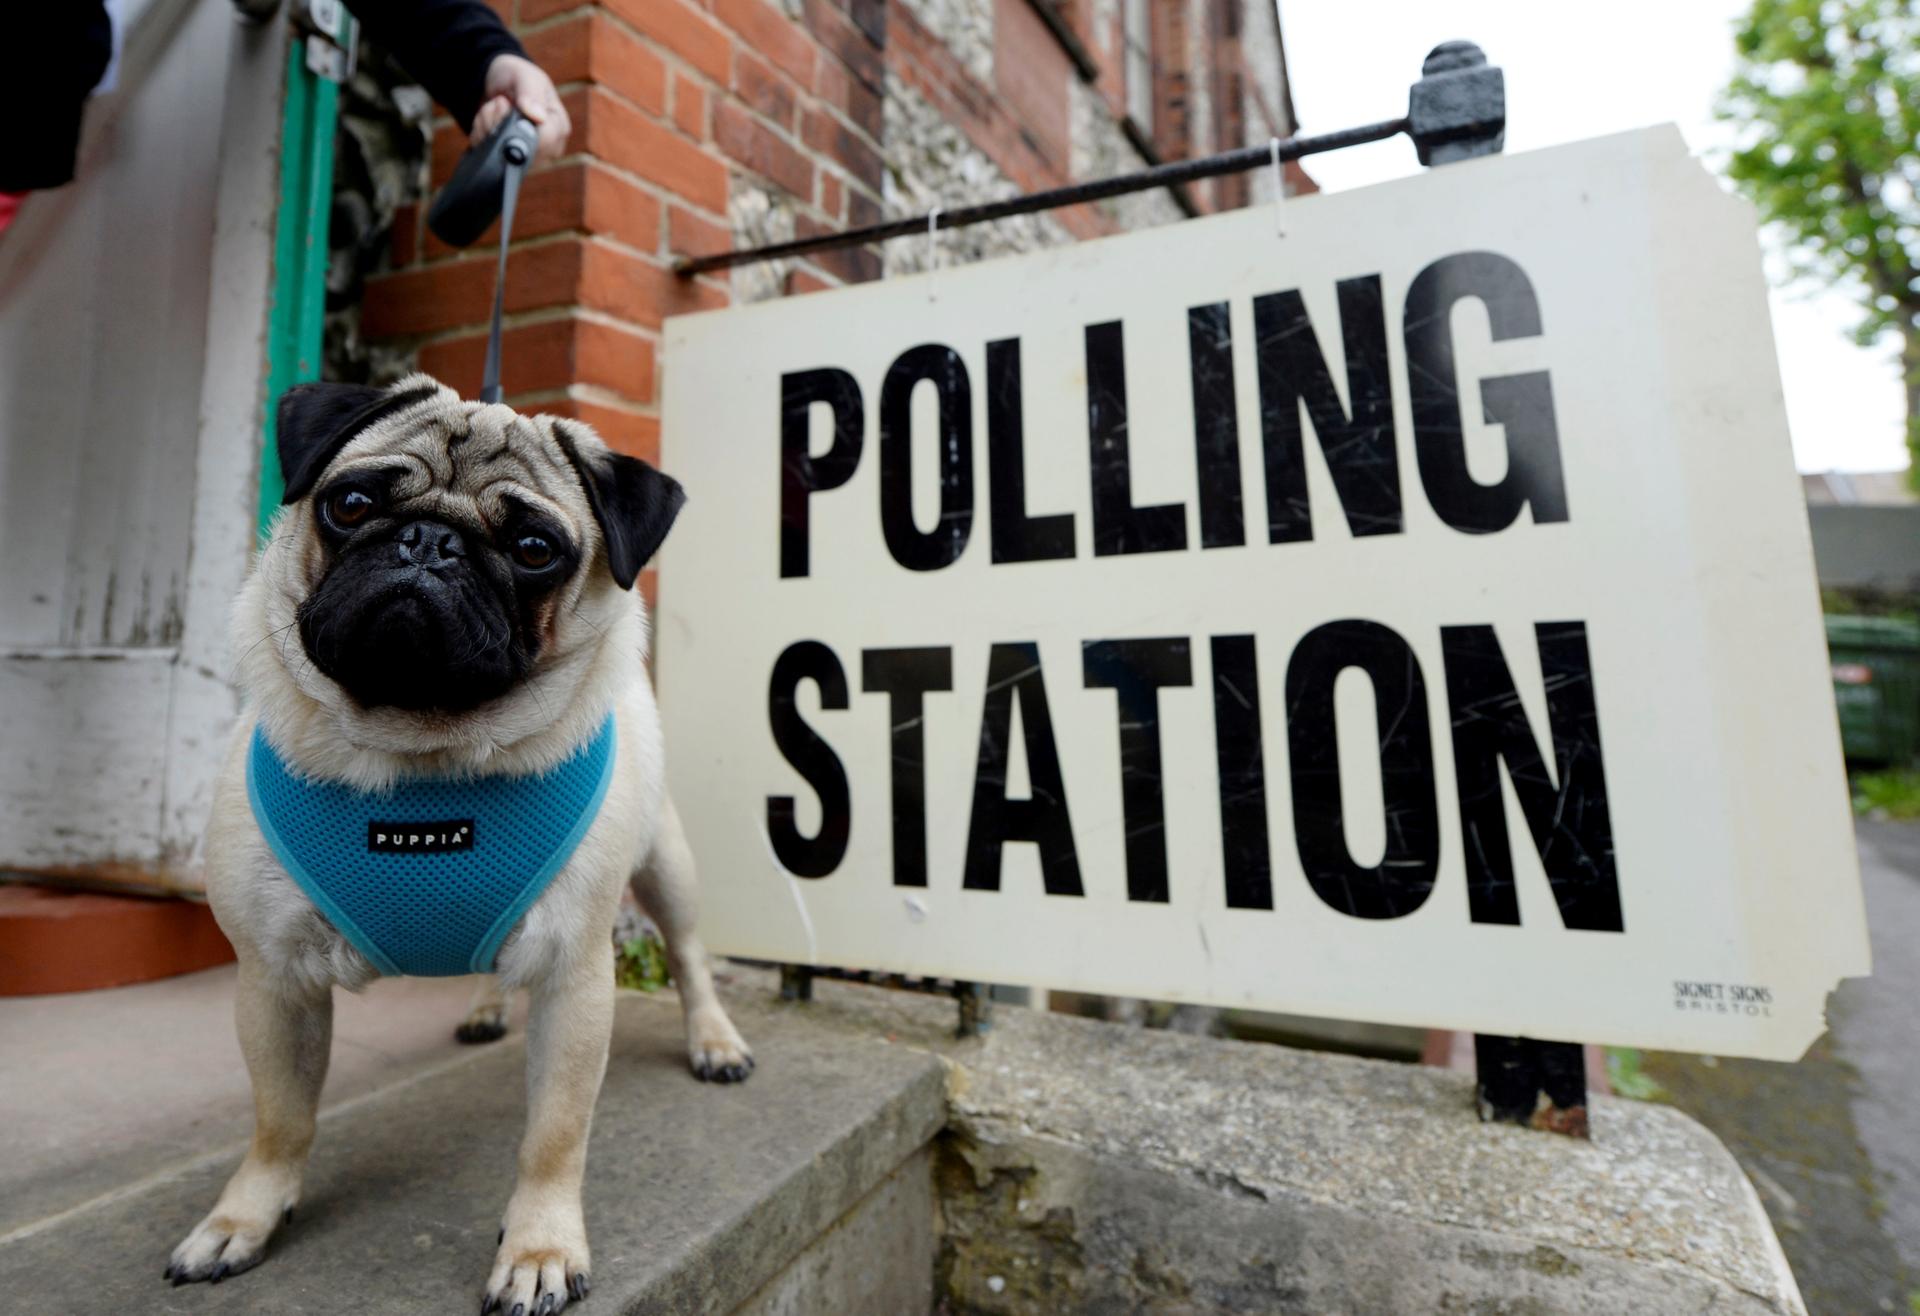 A voter arrives with a dog at a polling station in Brighton.